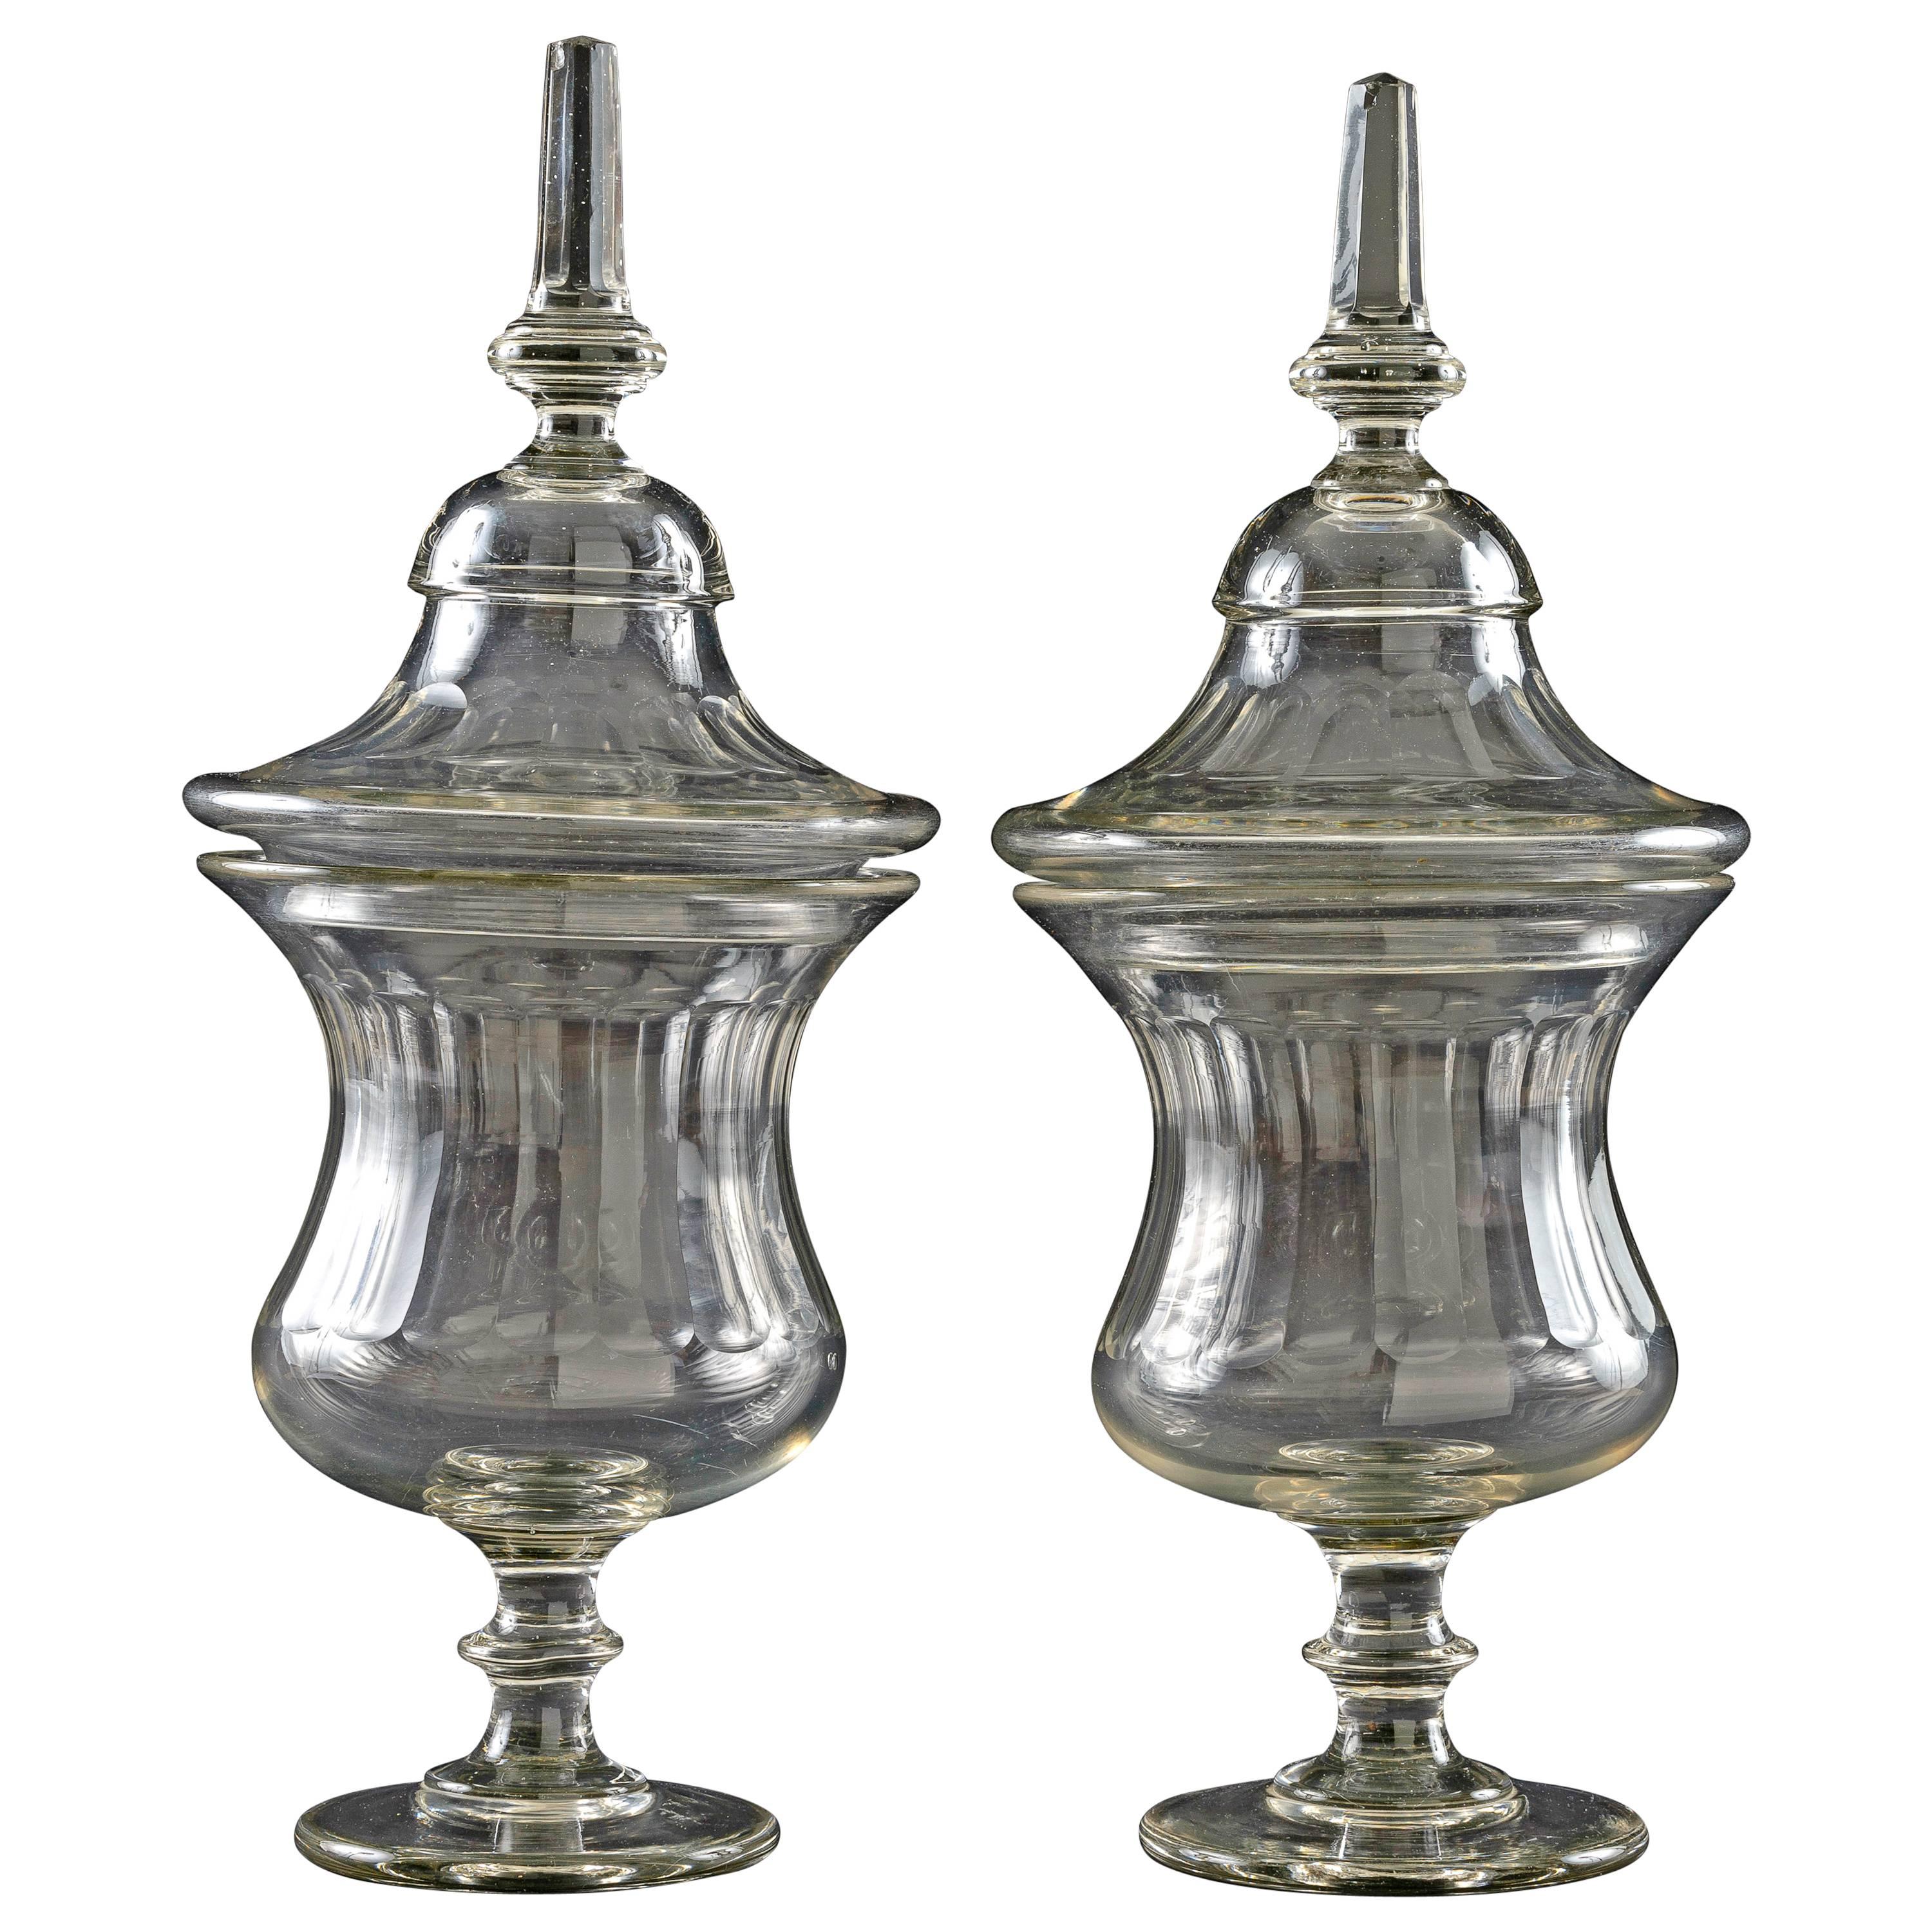 19th Century Pair of Large Cut-Glass Apothecary Jars with Faceted Finial Cover